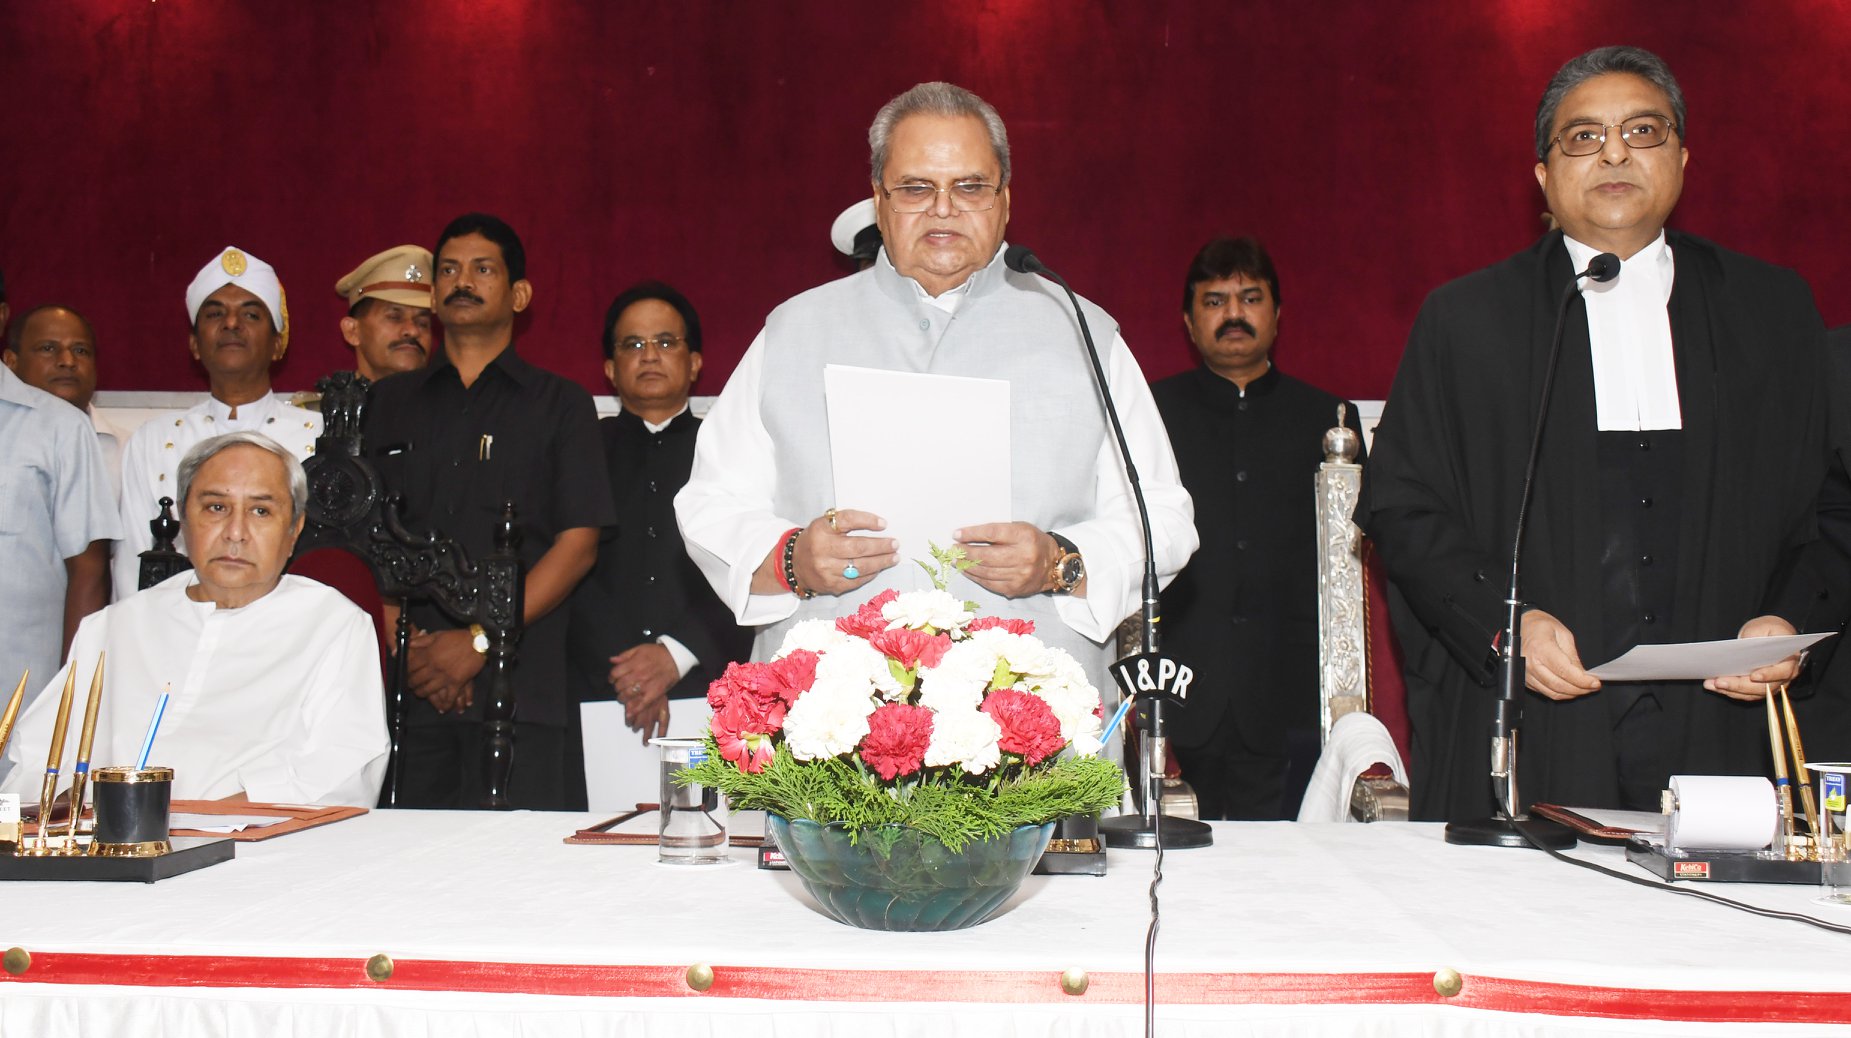 J&K governor says student unions provide good platform to develop personality 